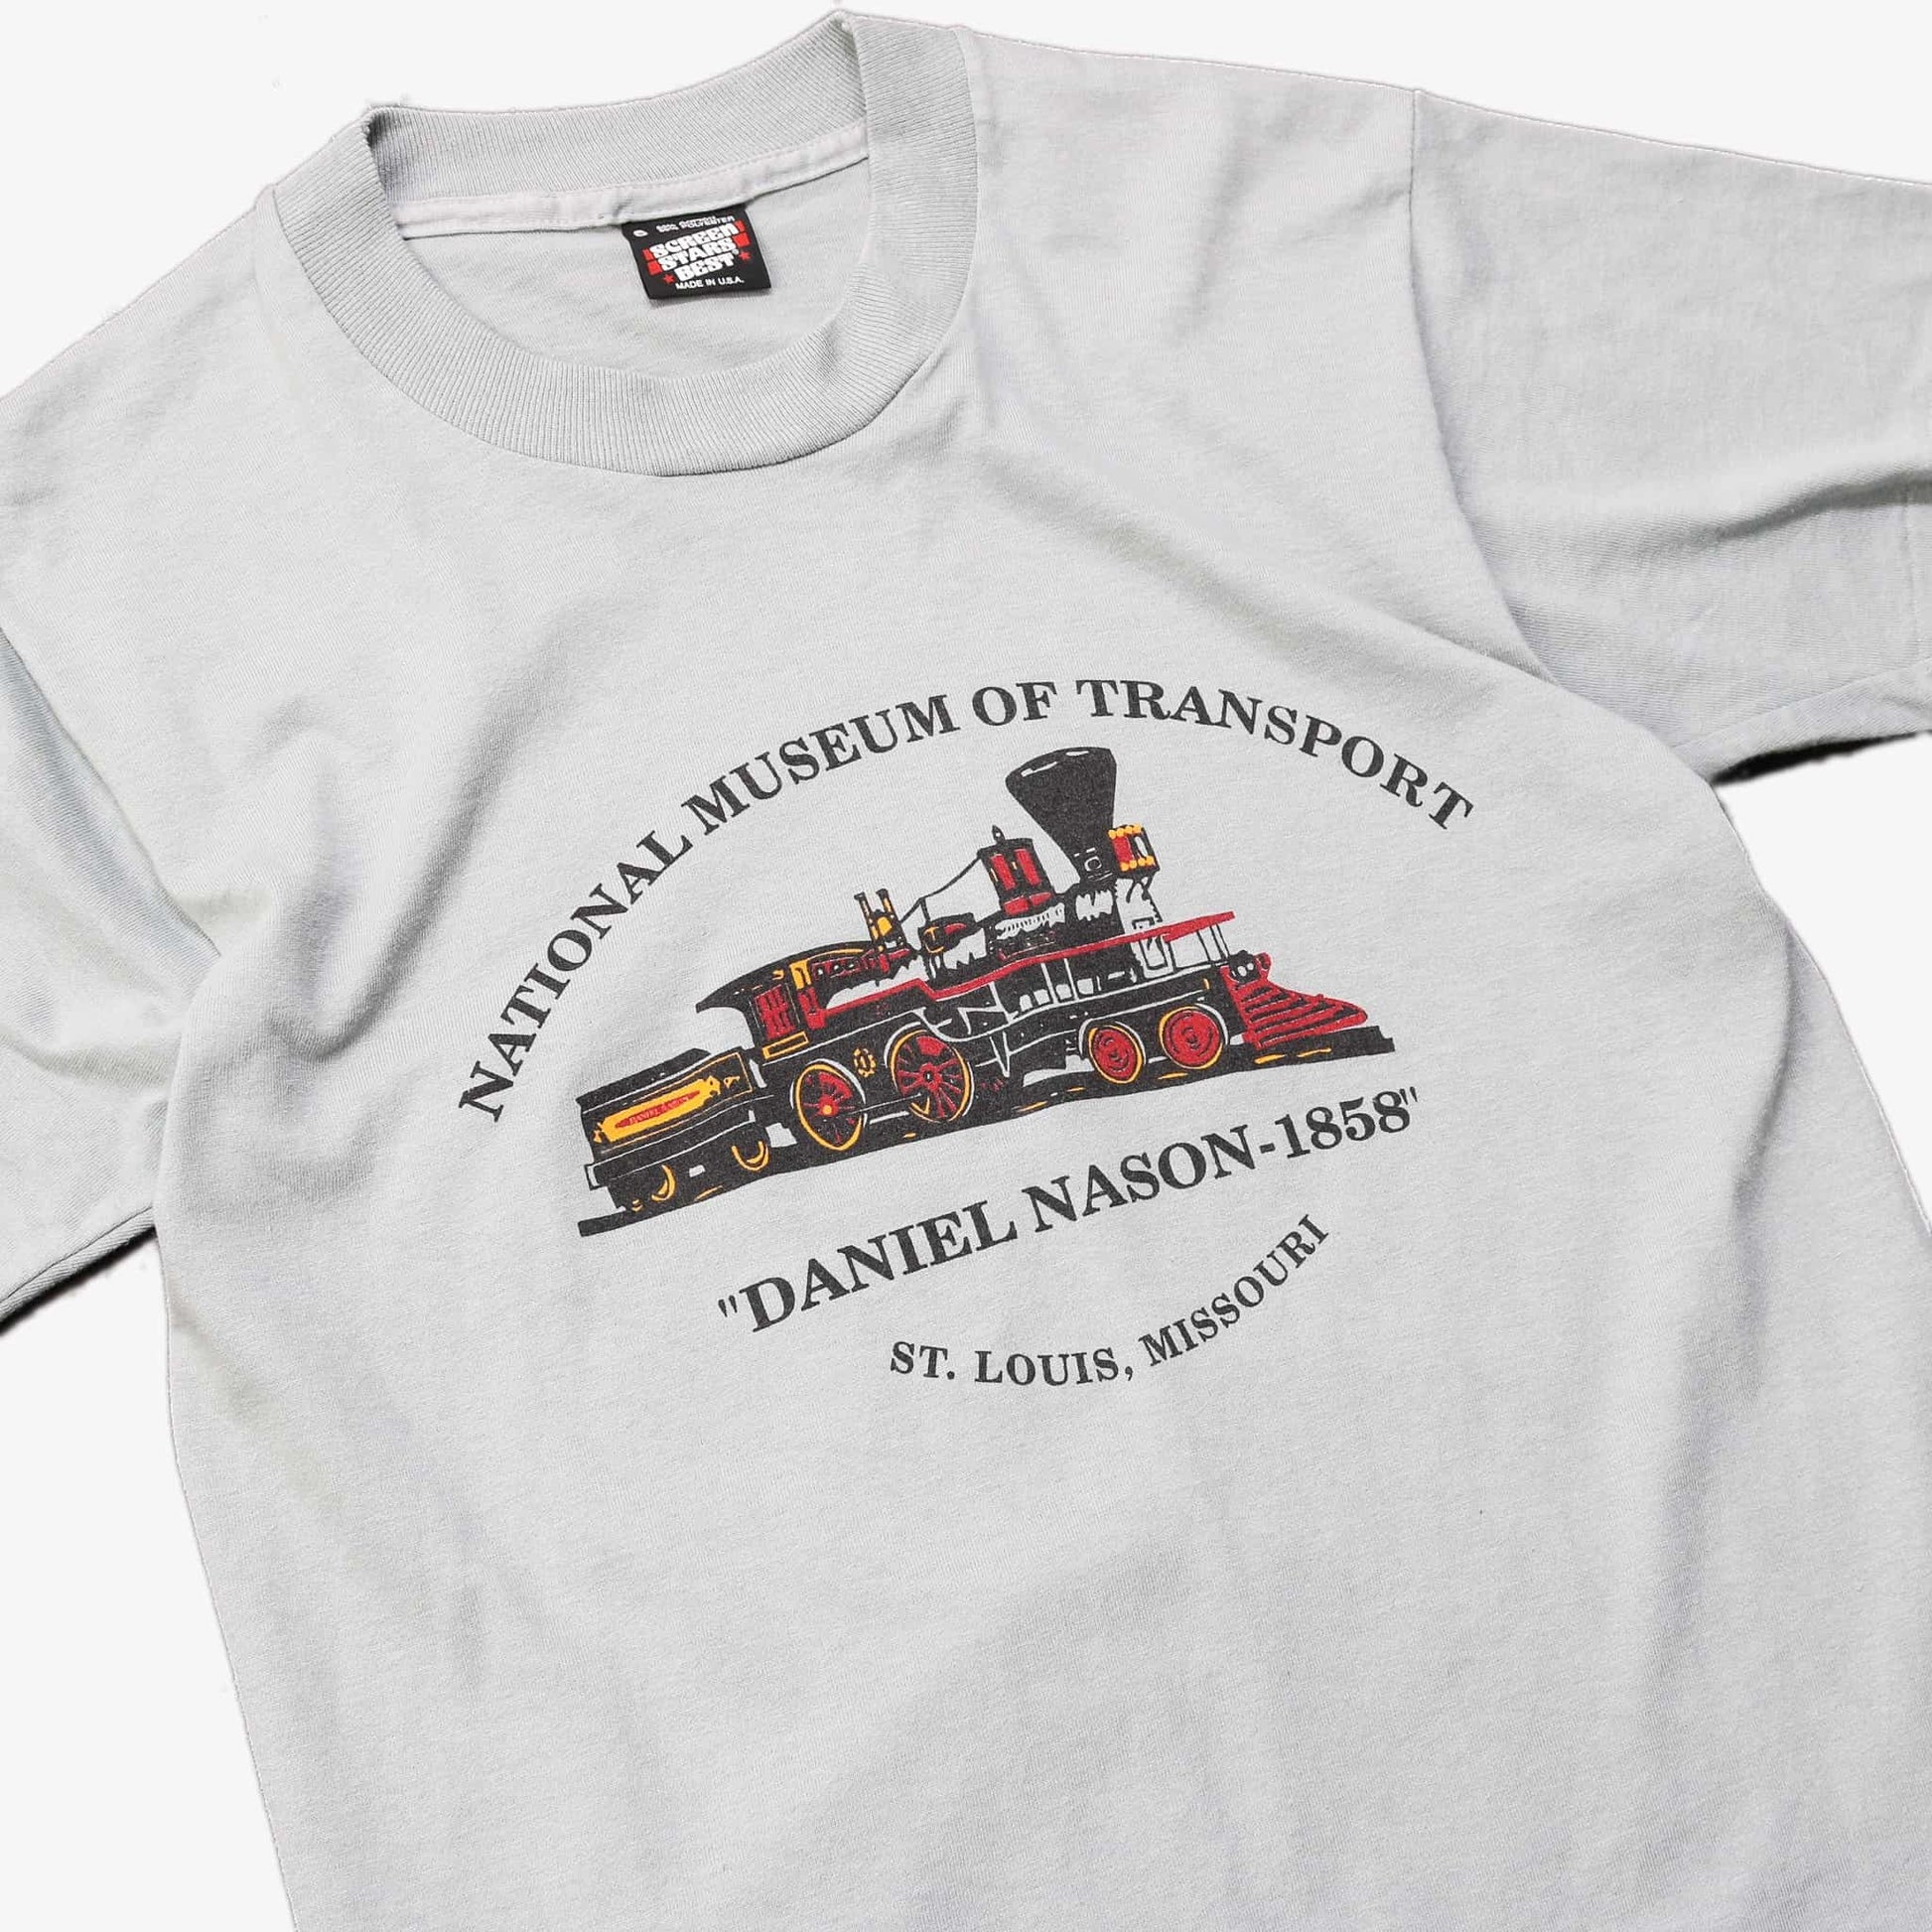 Vintage 'National Museum Of Transport' T-Shirt - American Madness